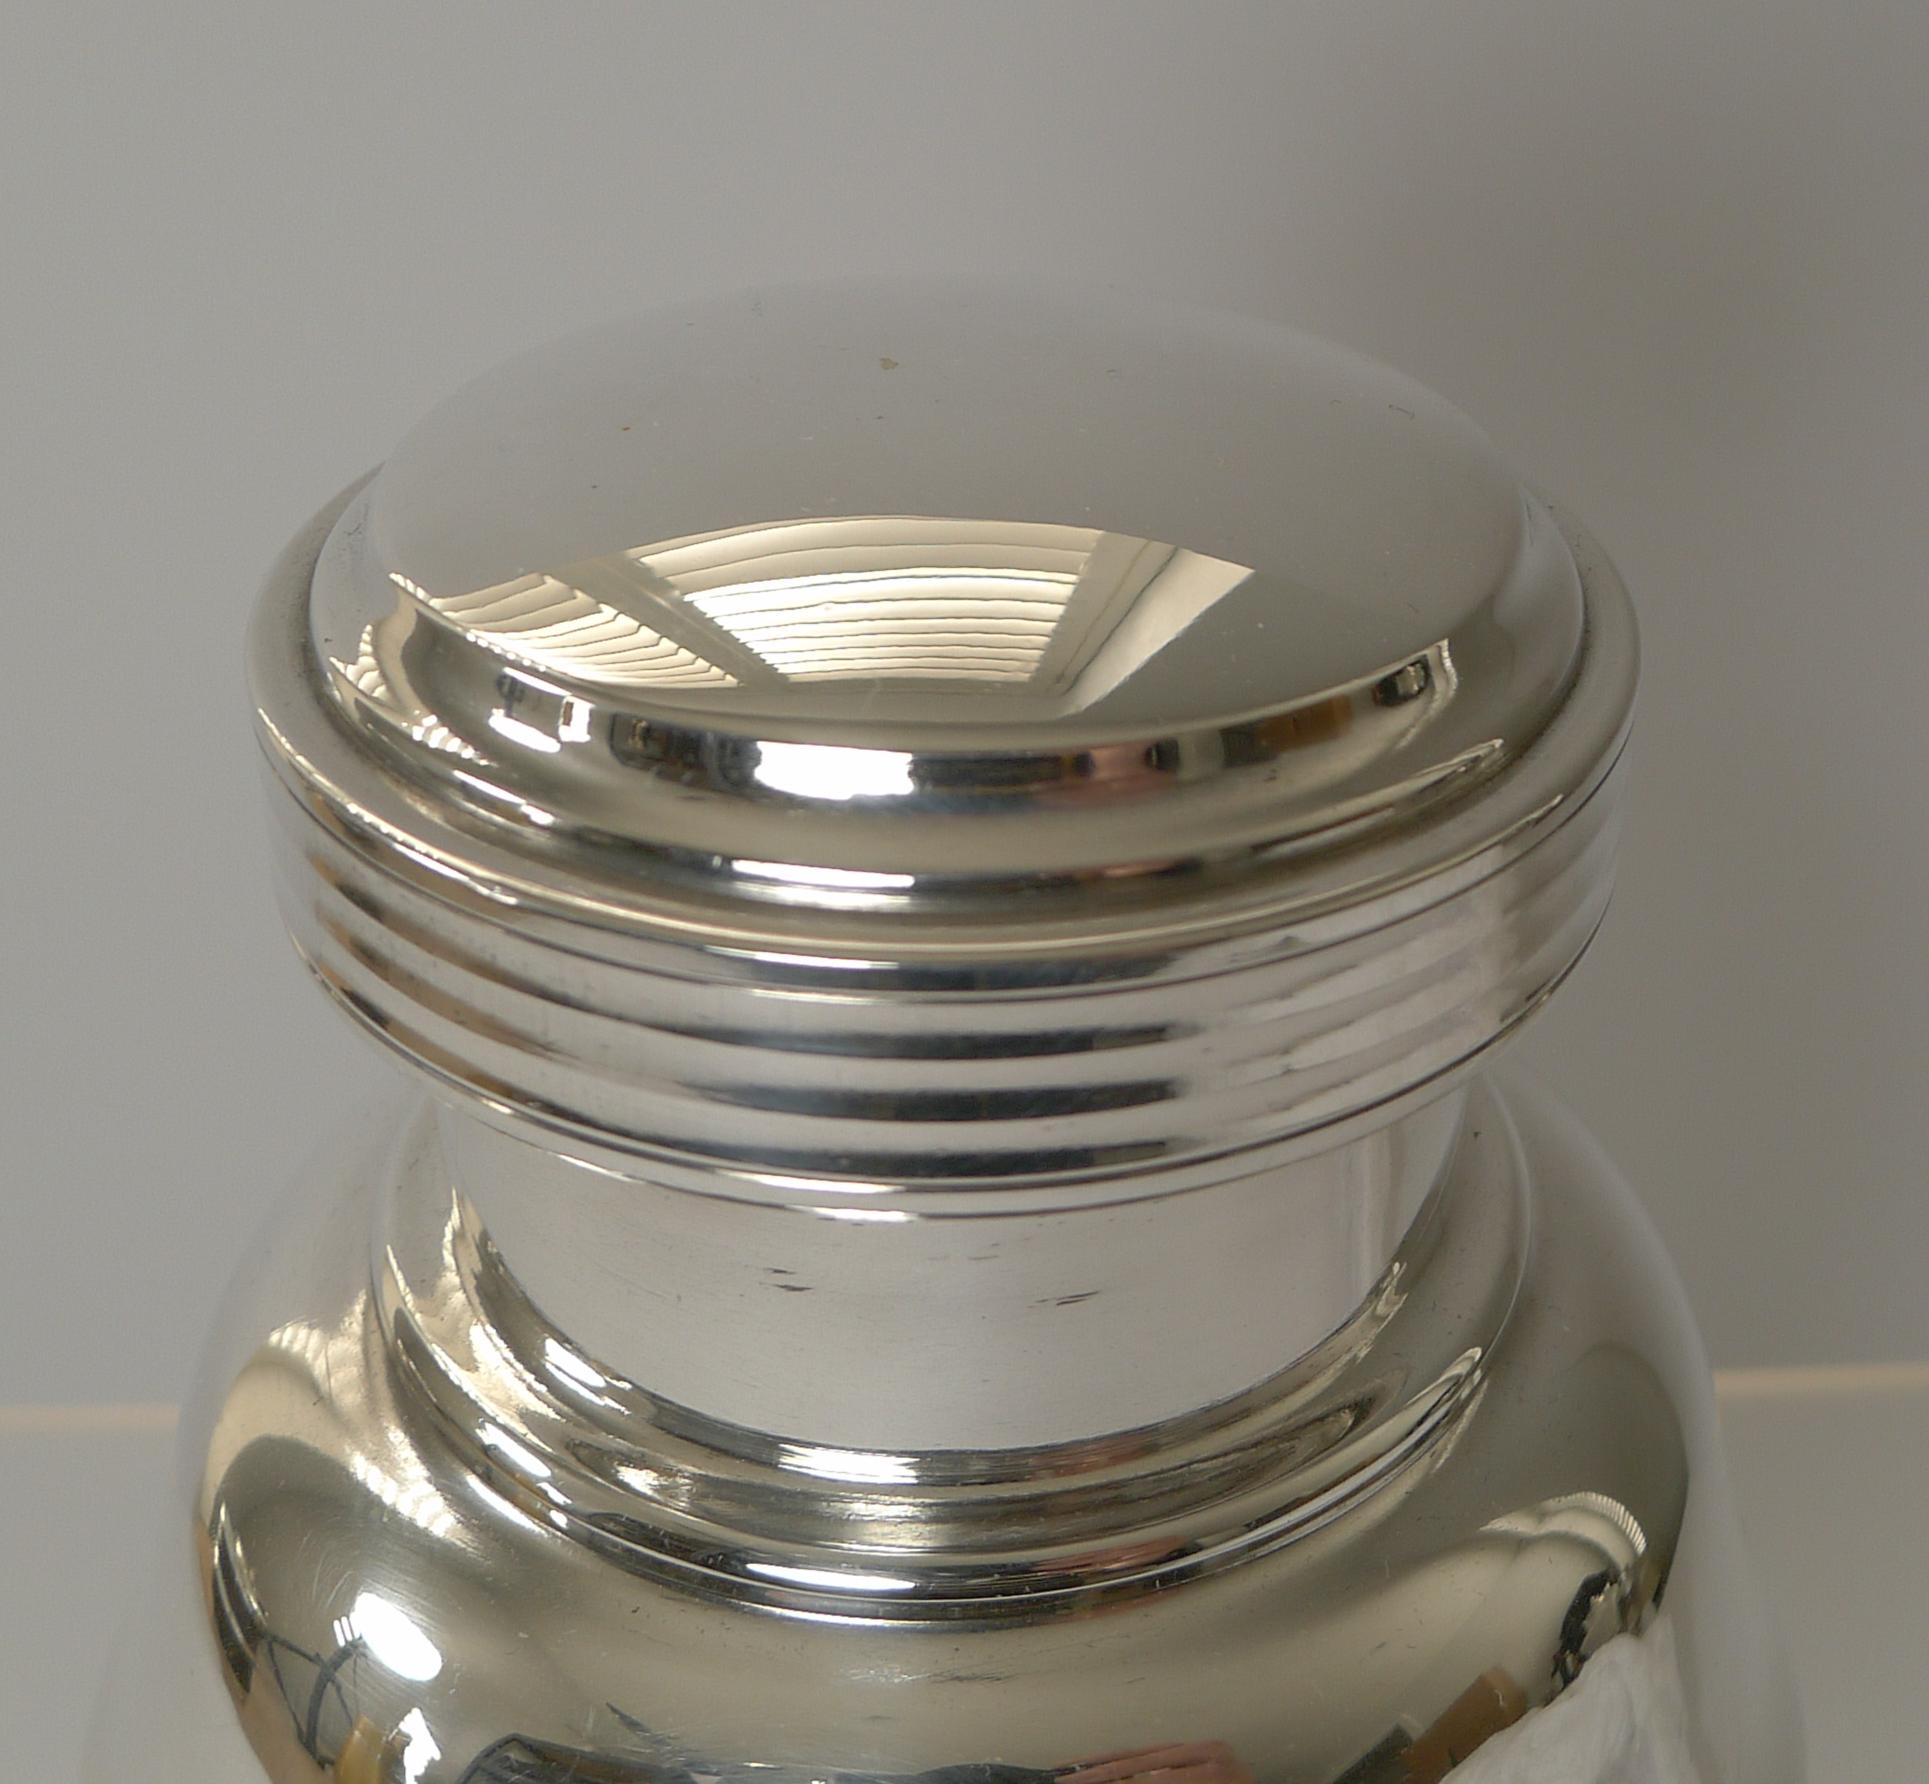 A strong shape and good proportions make this striking cocktail shaker a handsome example to adorn the finest of bars.

Made from silver plate, it has just returned from our silversmith's workshop where it has been professionally cleaned and